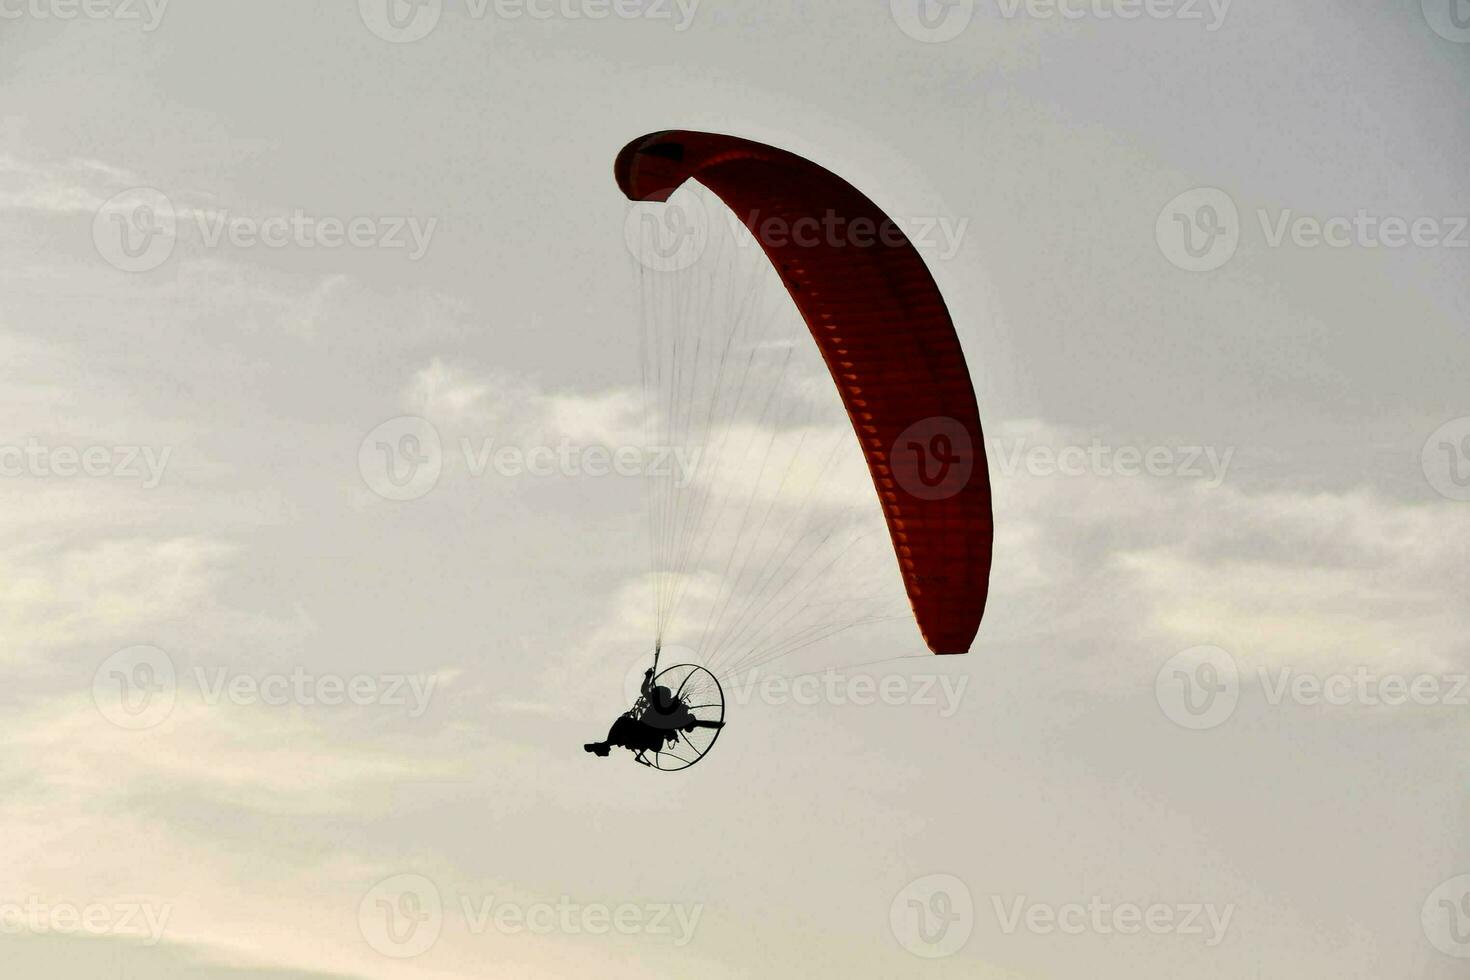 a person is paragliding in the sky photo